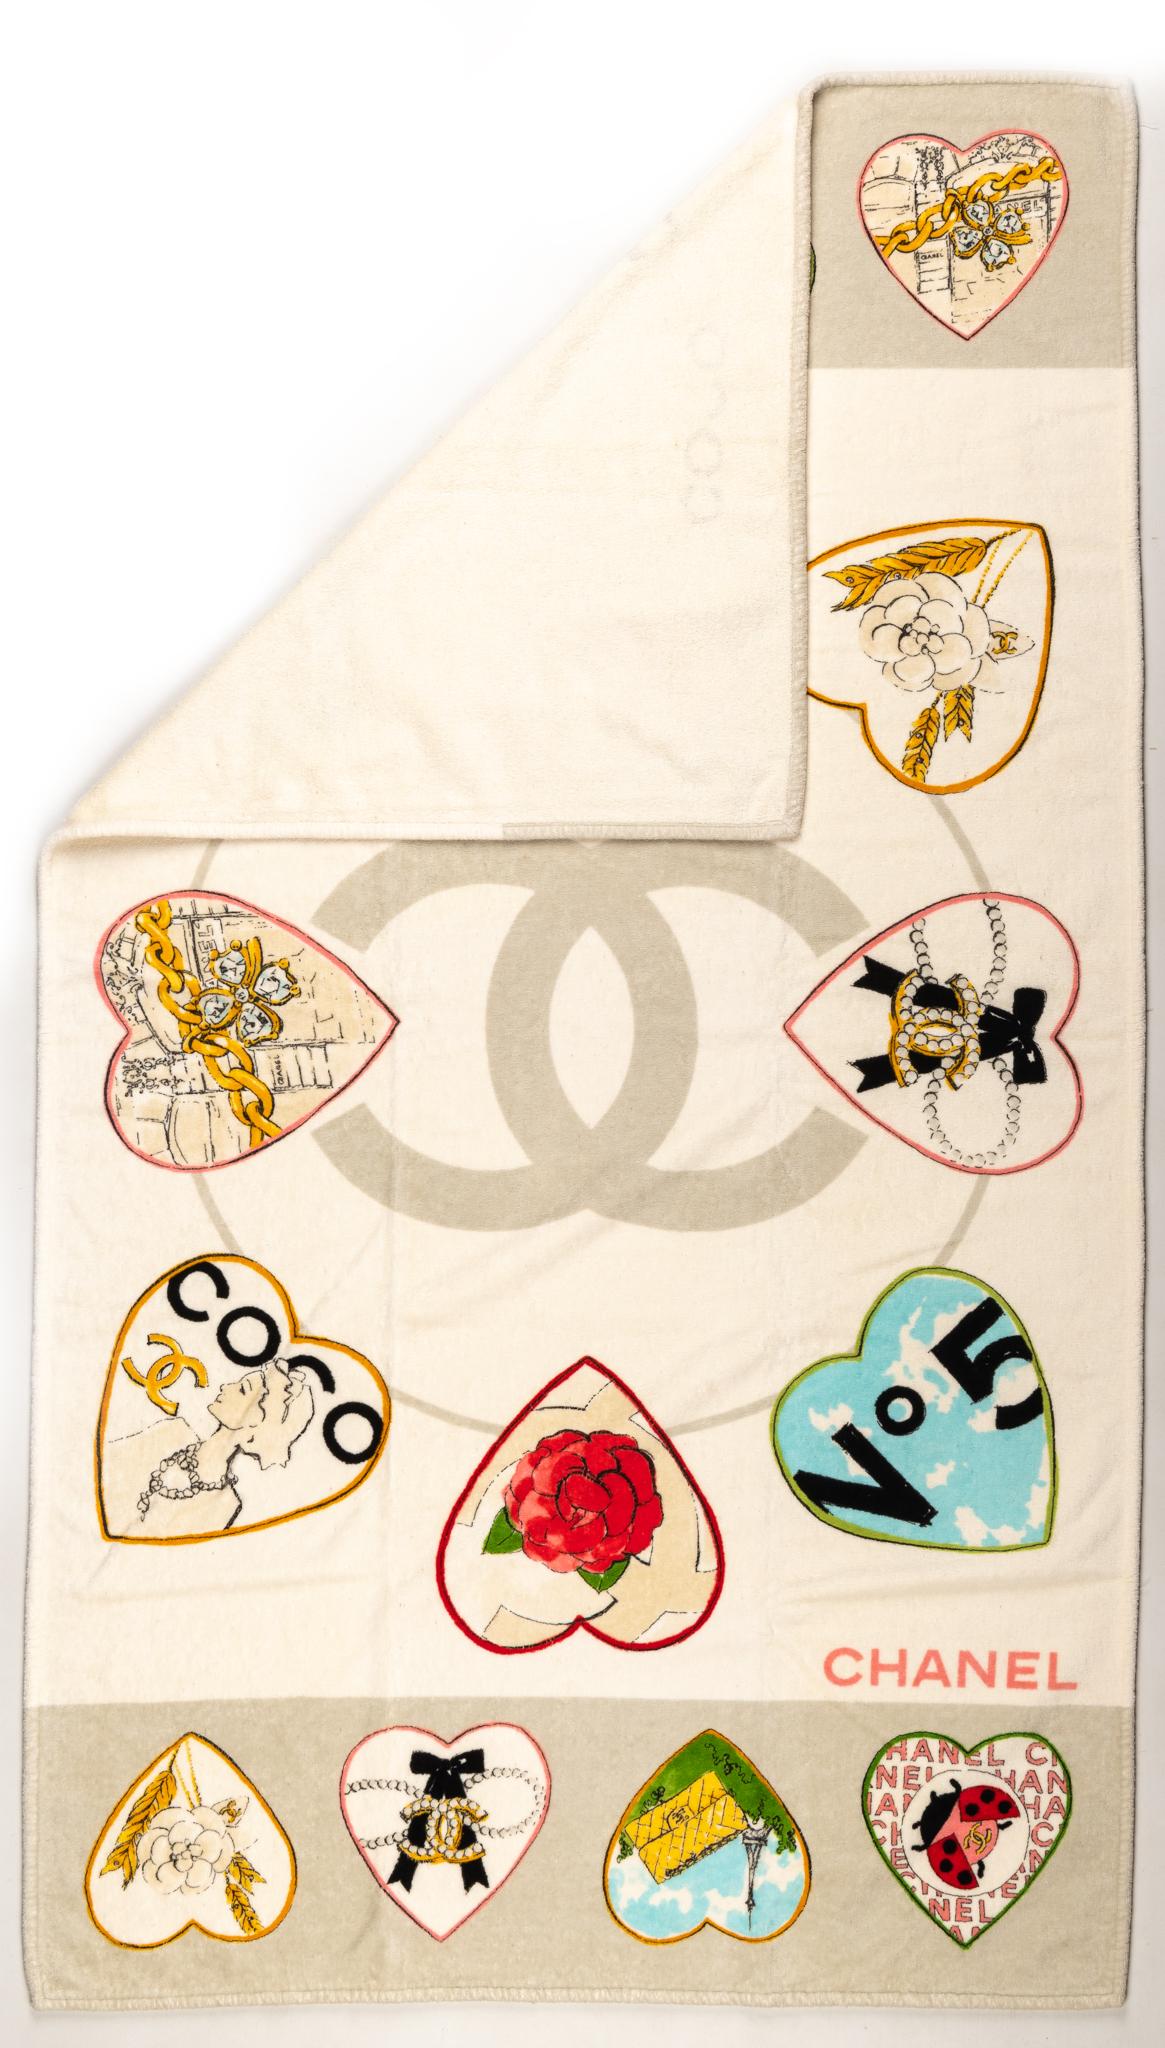 Chanel new beach towel in cream color base with colorful heart logo images.